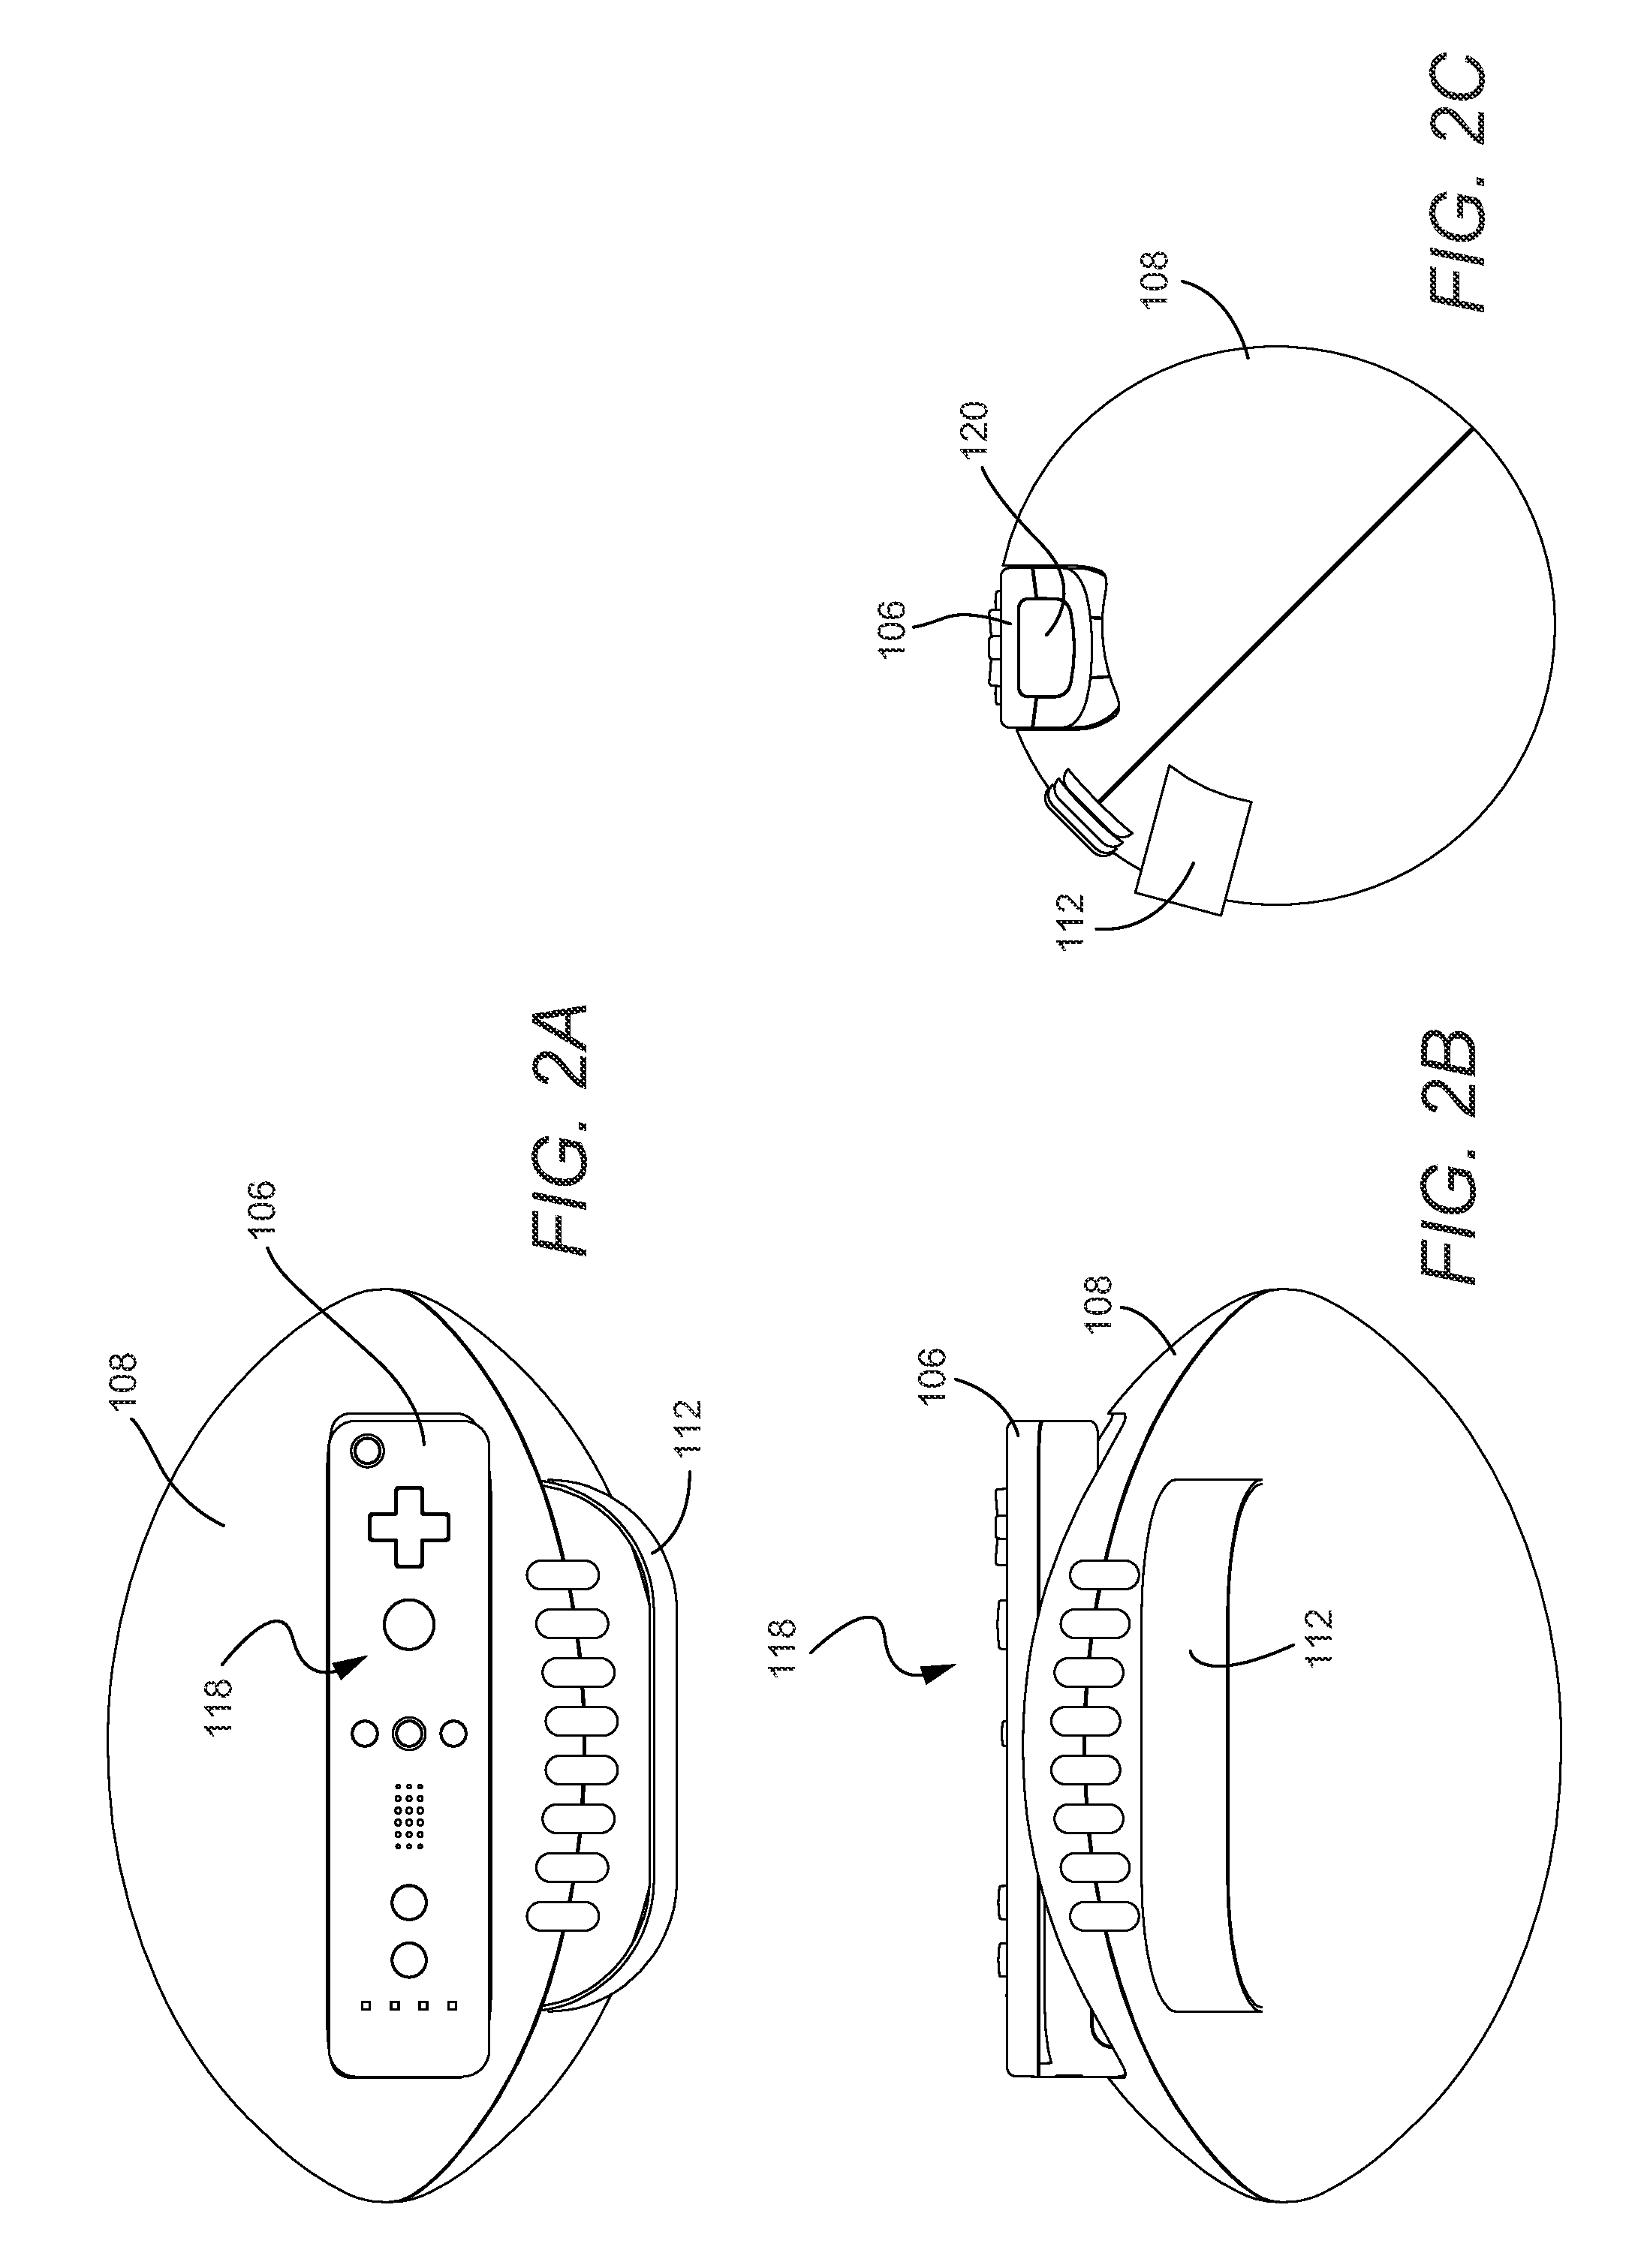 Method and apparatus for simulating games involving a ball